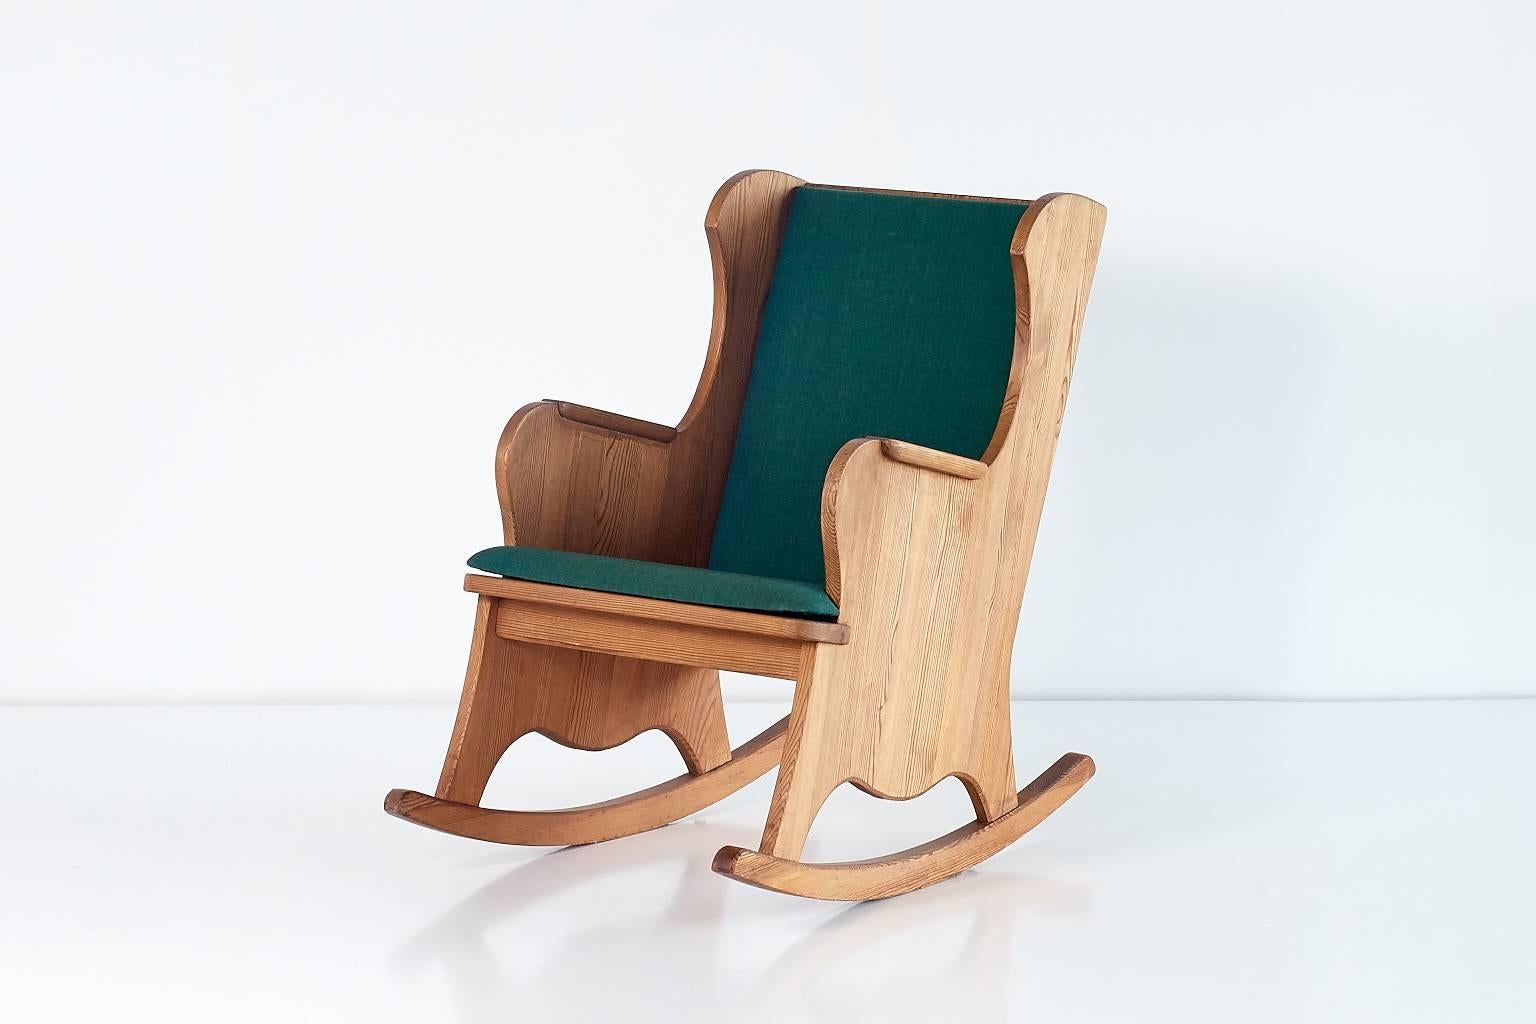 This rare rocking chair is part of the 'Lovö' series designed by Axel Einar Hjorth for the high-end Stockholm-based Nordiska Kompaniet department store in 1932. Executed in pinewood, this chair offers a particularly striking woodgrain. The original